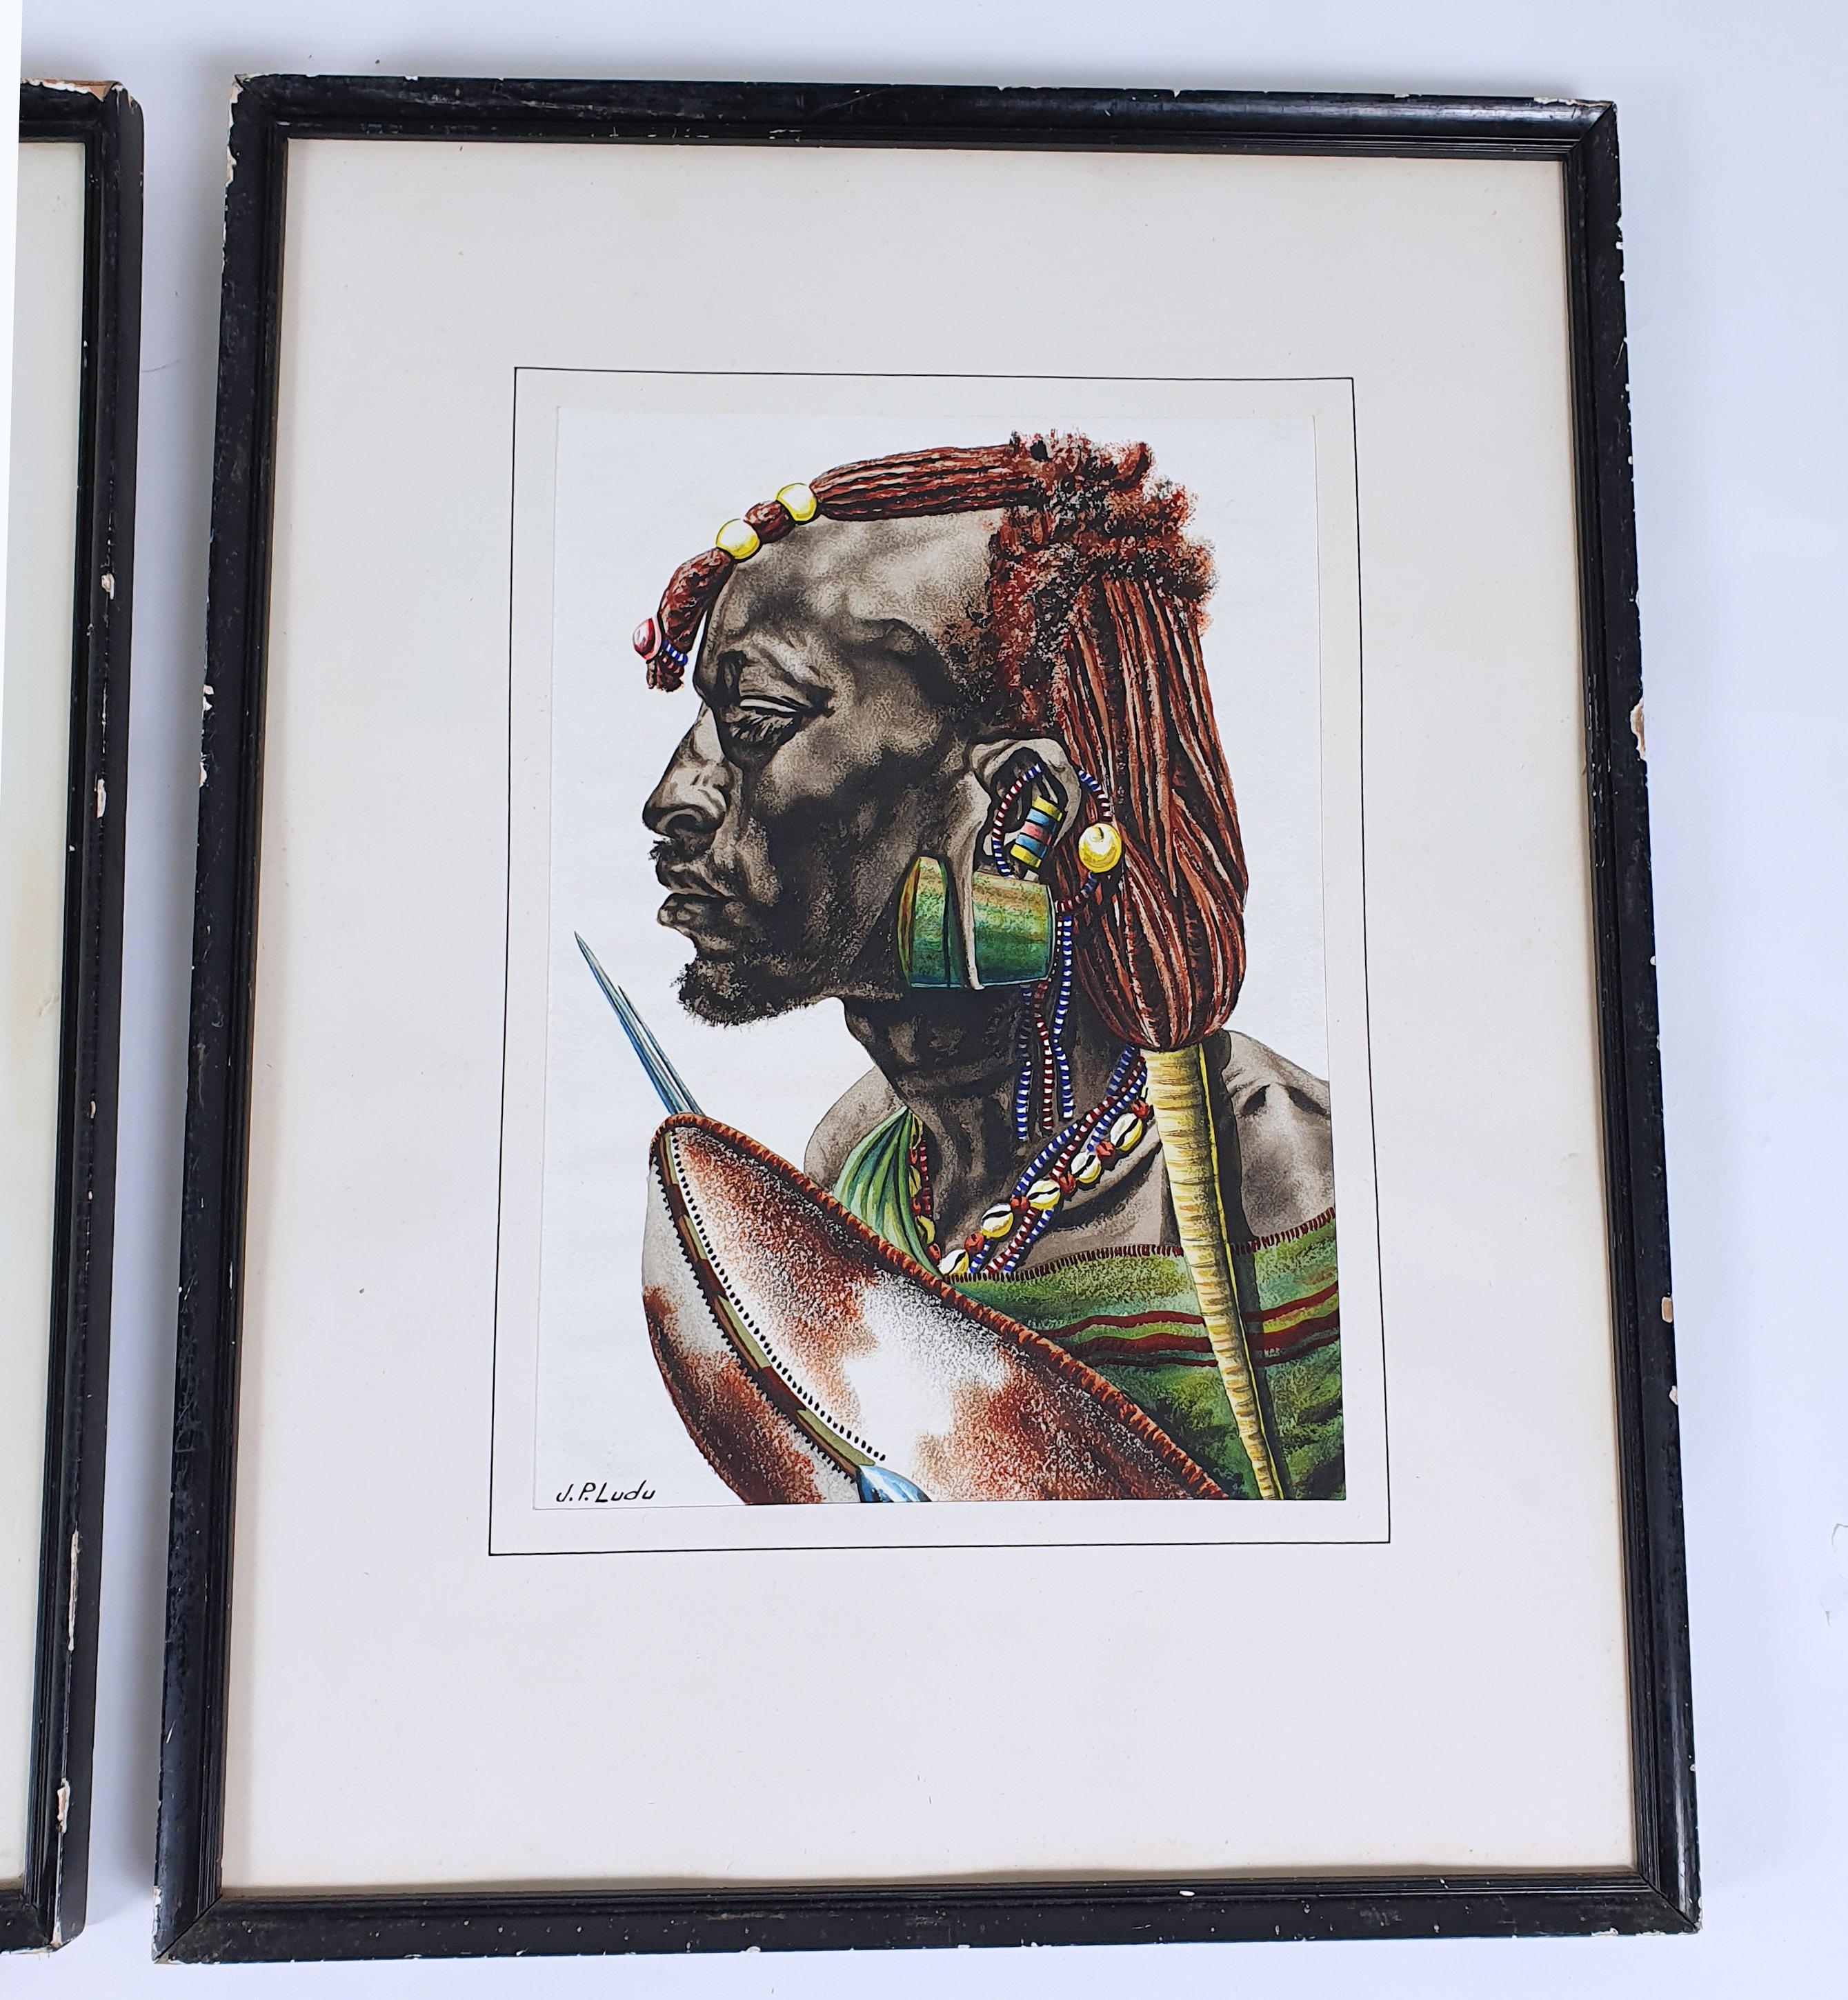 This magnificent pair of watercolours depicts 2 African tribesmen and are entitled Masai May 1963 and Karomojong May 1968. The watercolors are signed J P Ludo, a local artist from Ugandan, and are both in the original frames. Each picture with the